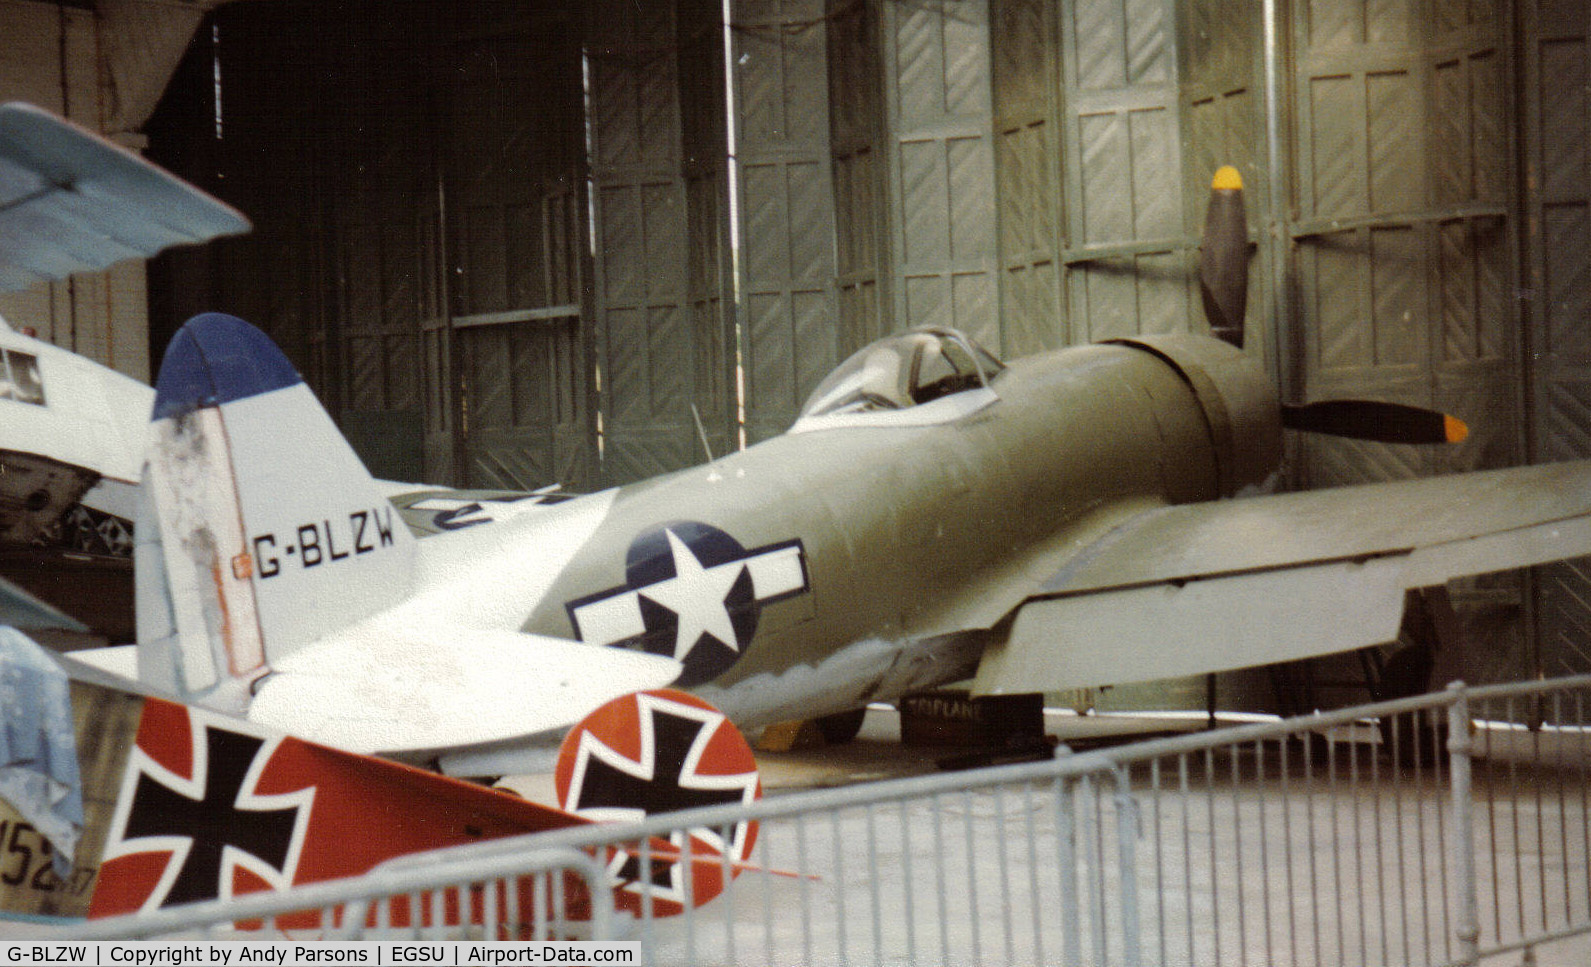 G-BLZW, 1945 Republic P-47D Thunderbolt C/N 399-55744, At Duxford i believe this reg was only carried briefly